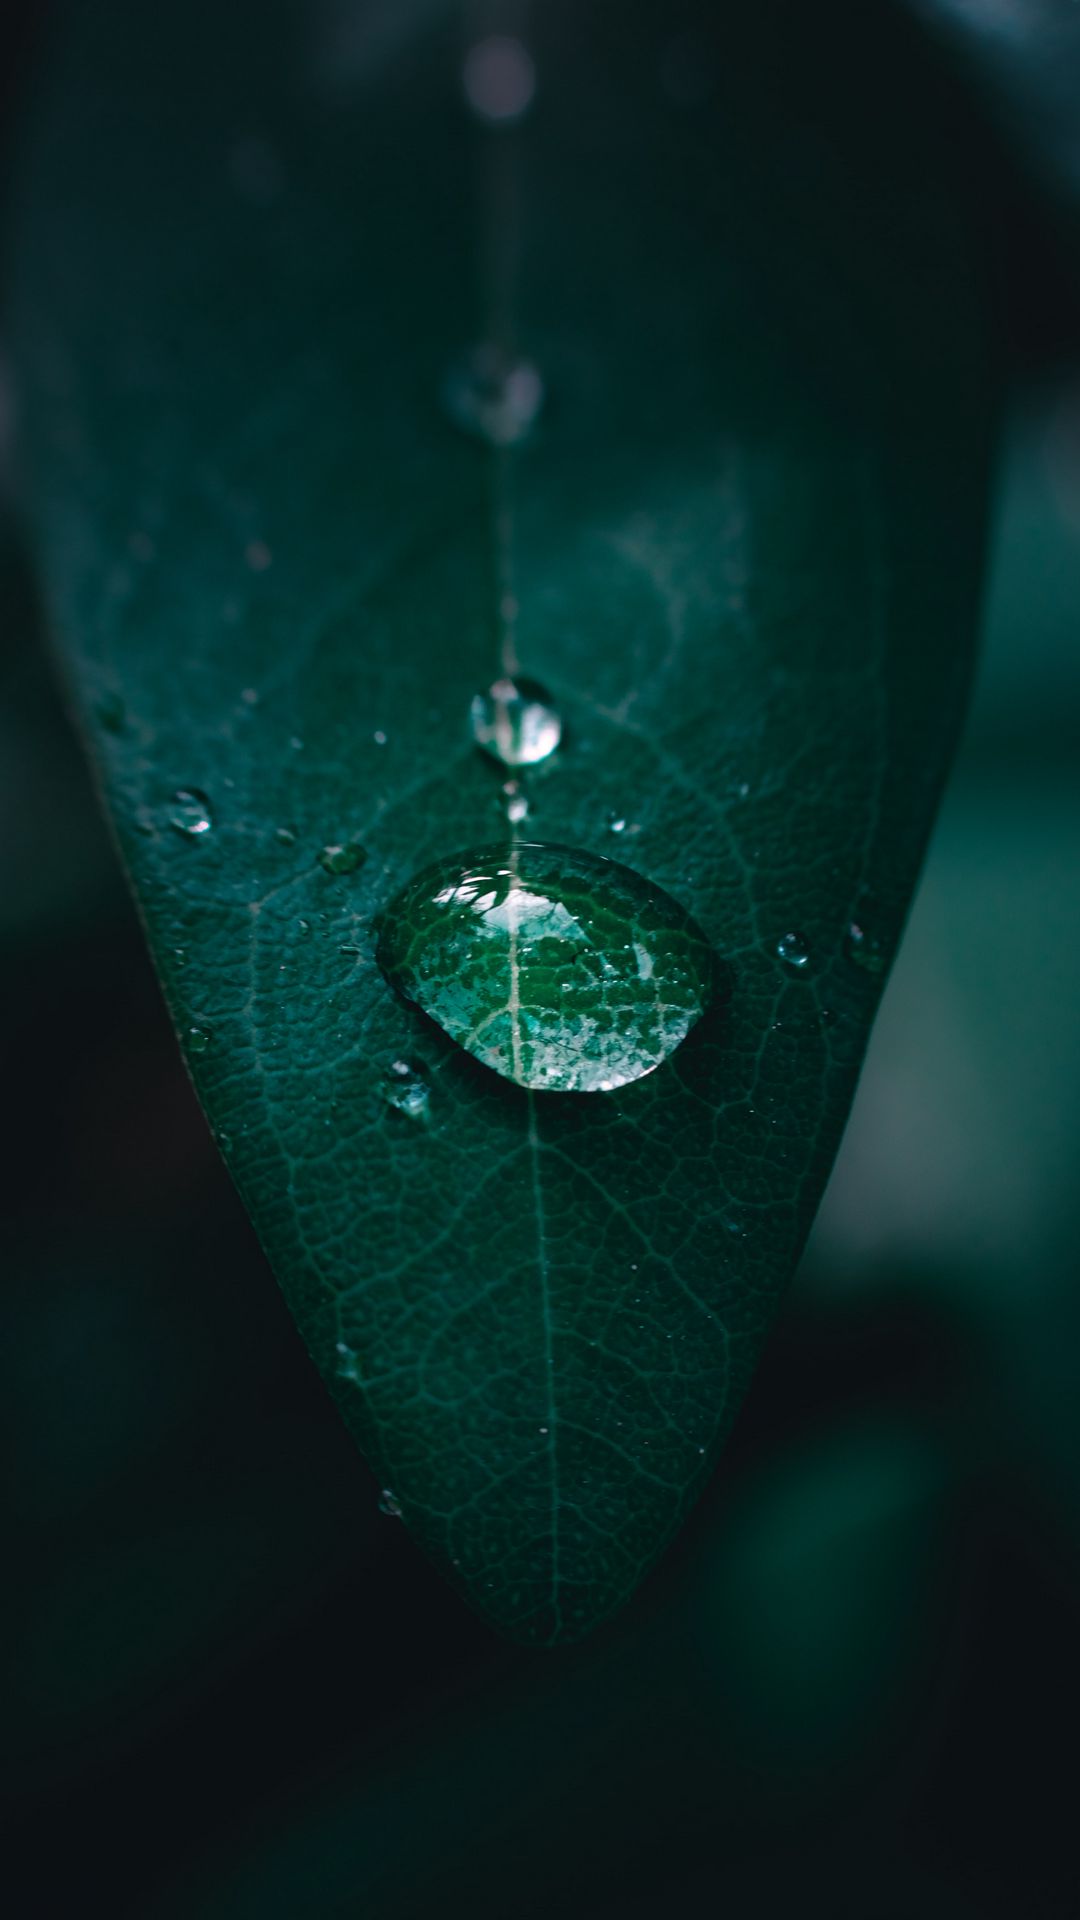 Leaf, Drop, Water, Photography